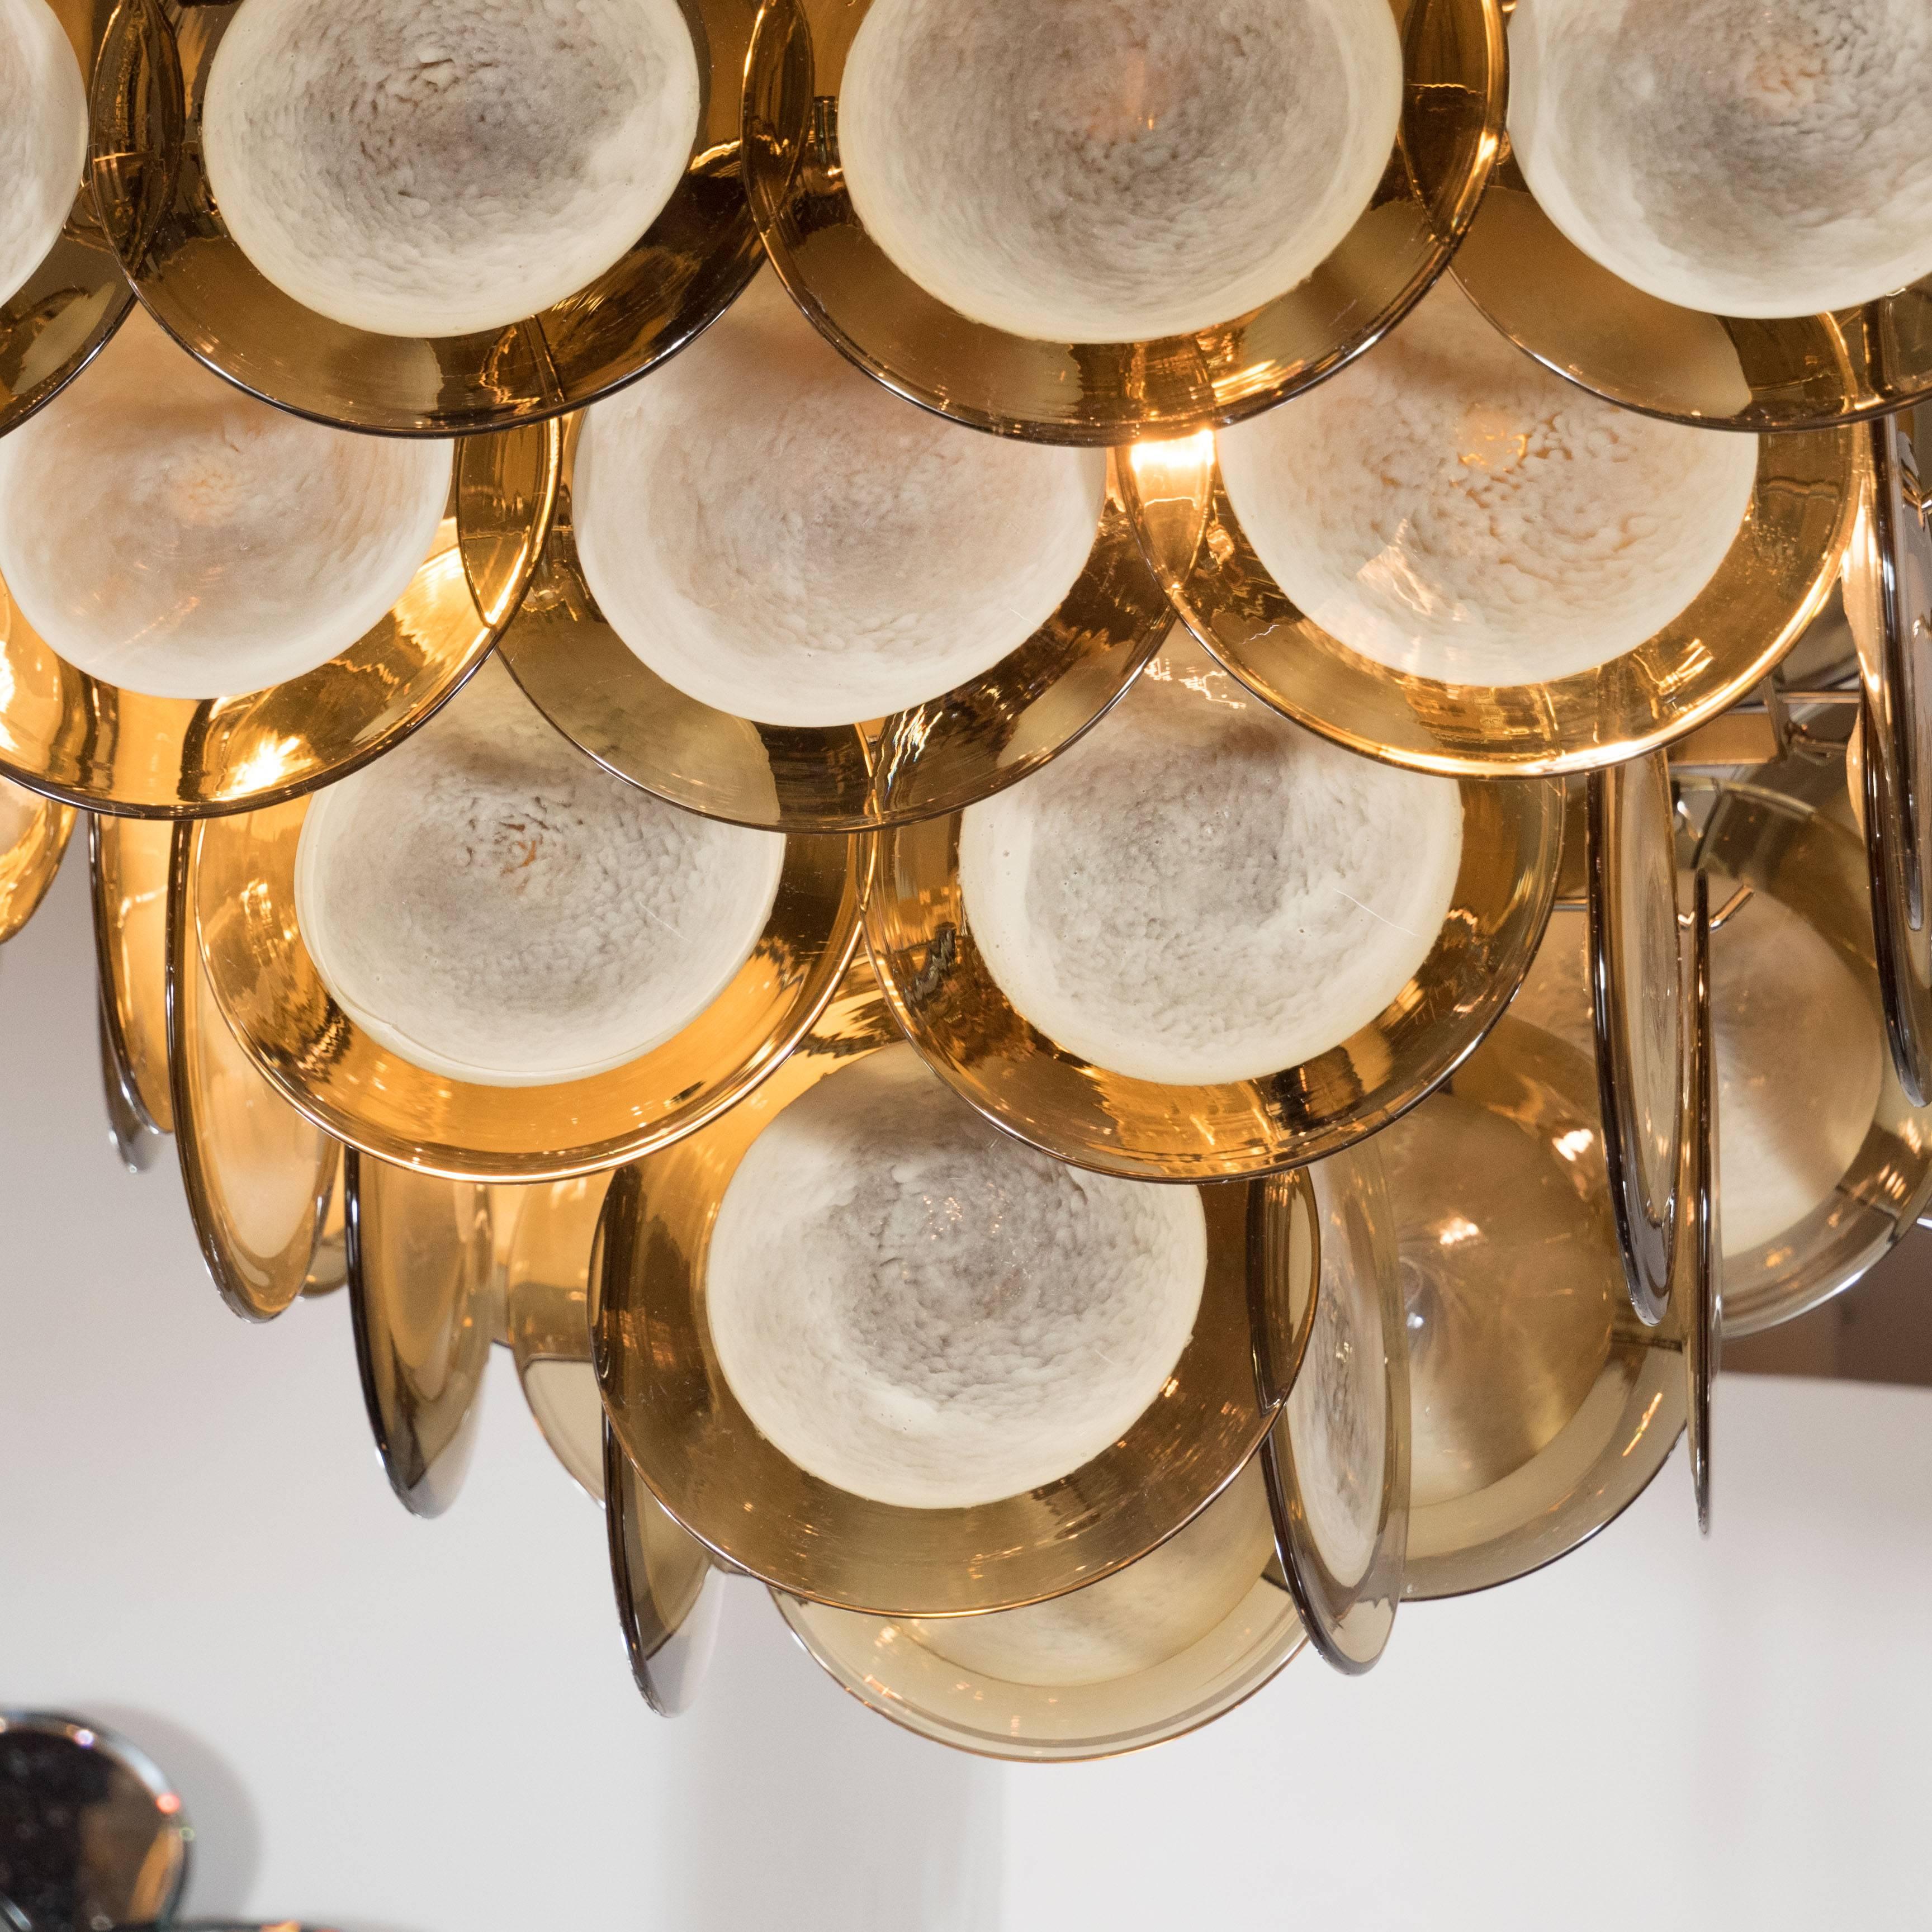 Modernist Pagoda-Style Diamond Shape Chandelier with Smoked Topaz Discs In Excellent Condition For Sale In New York, NY